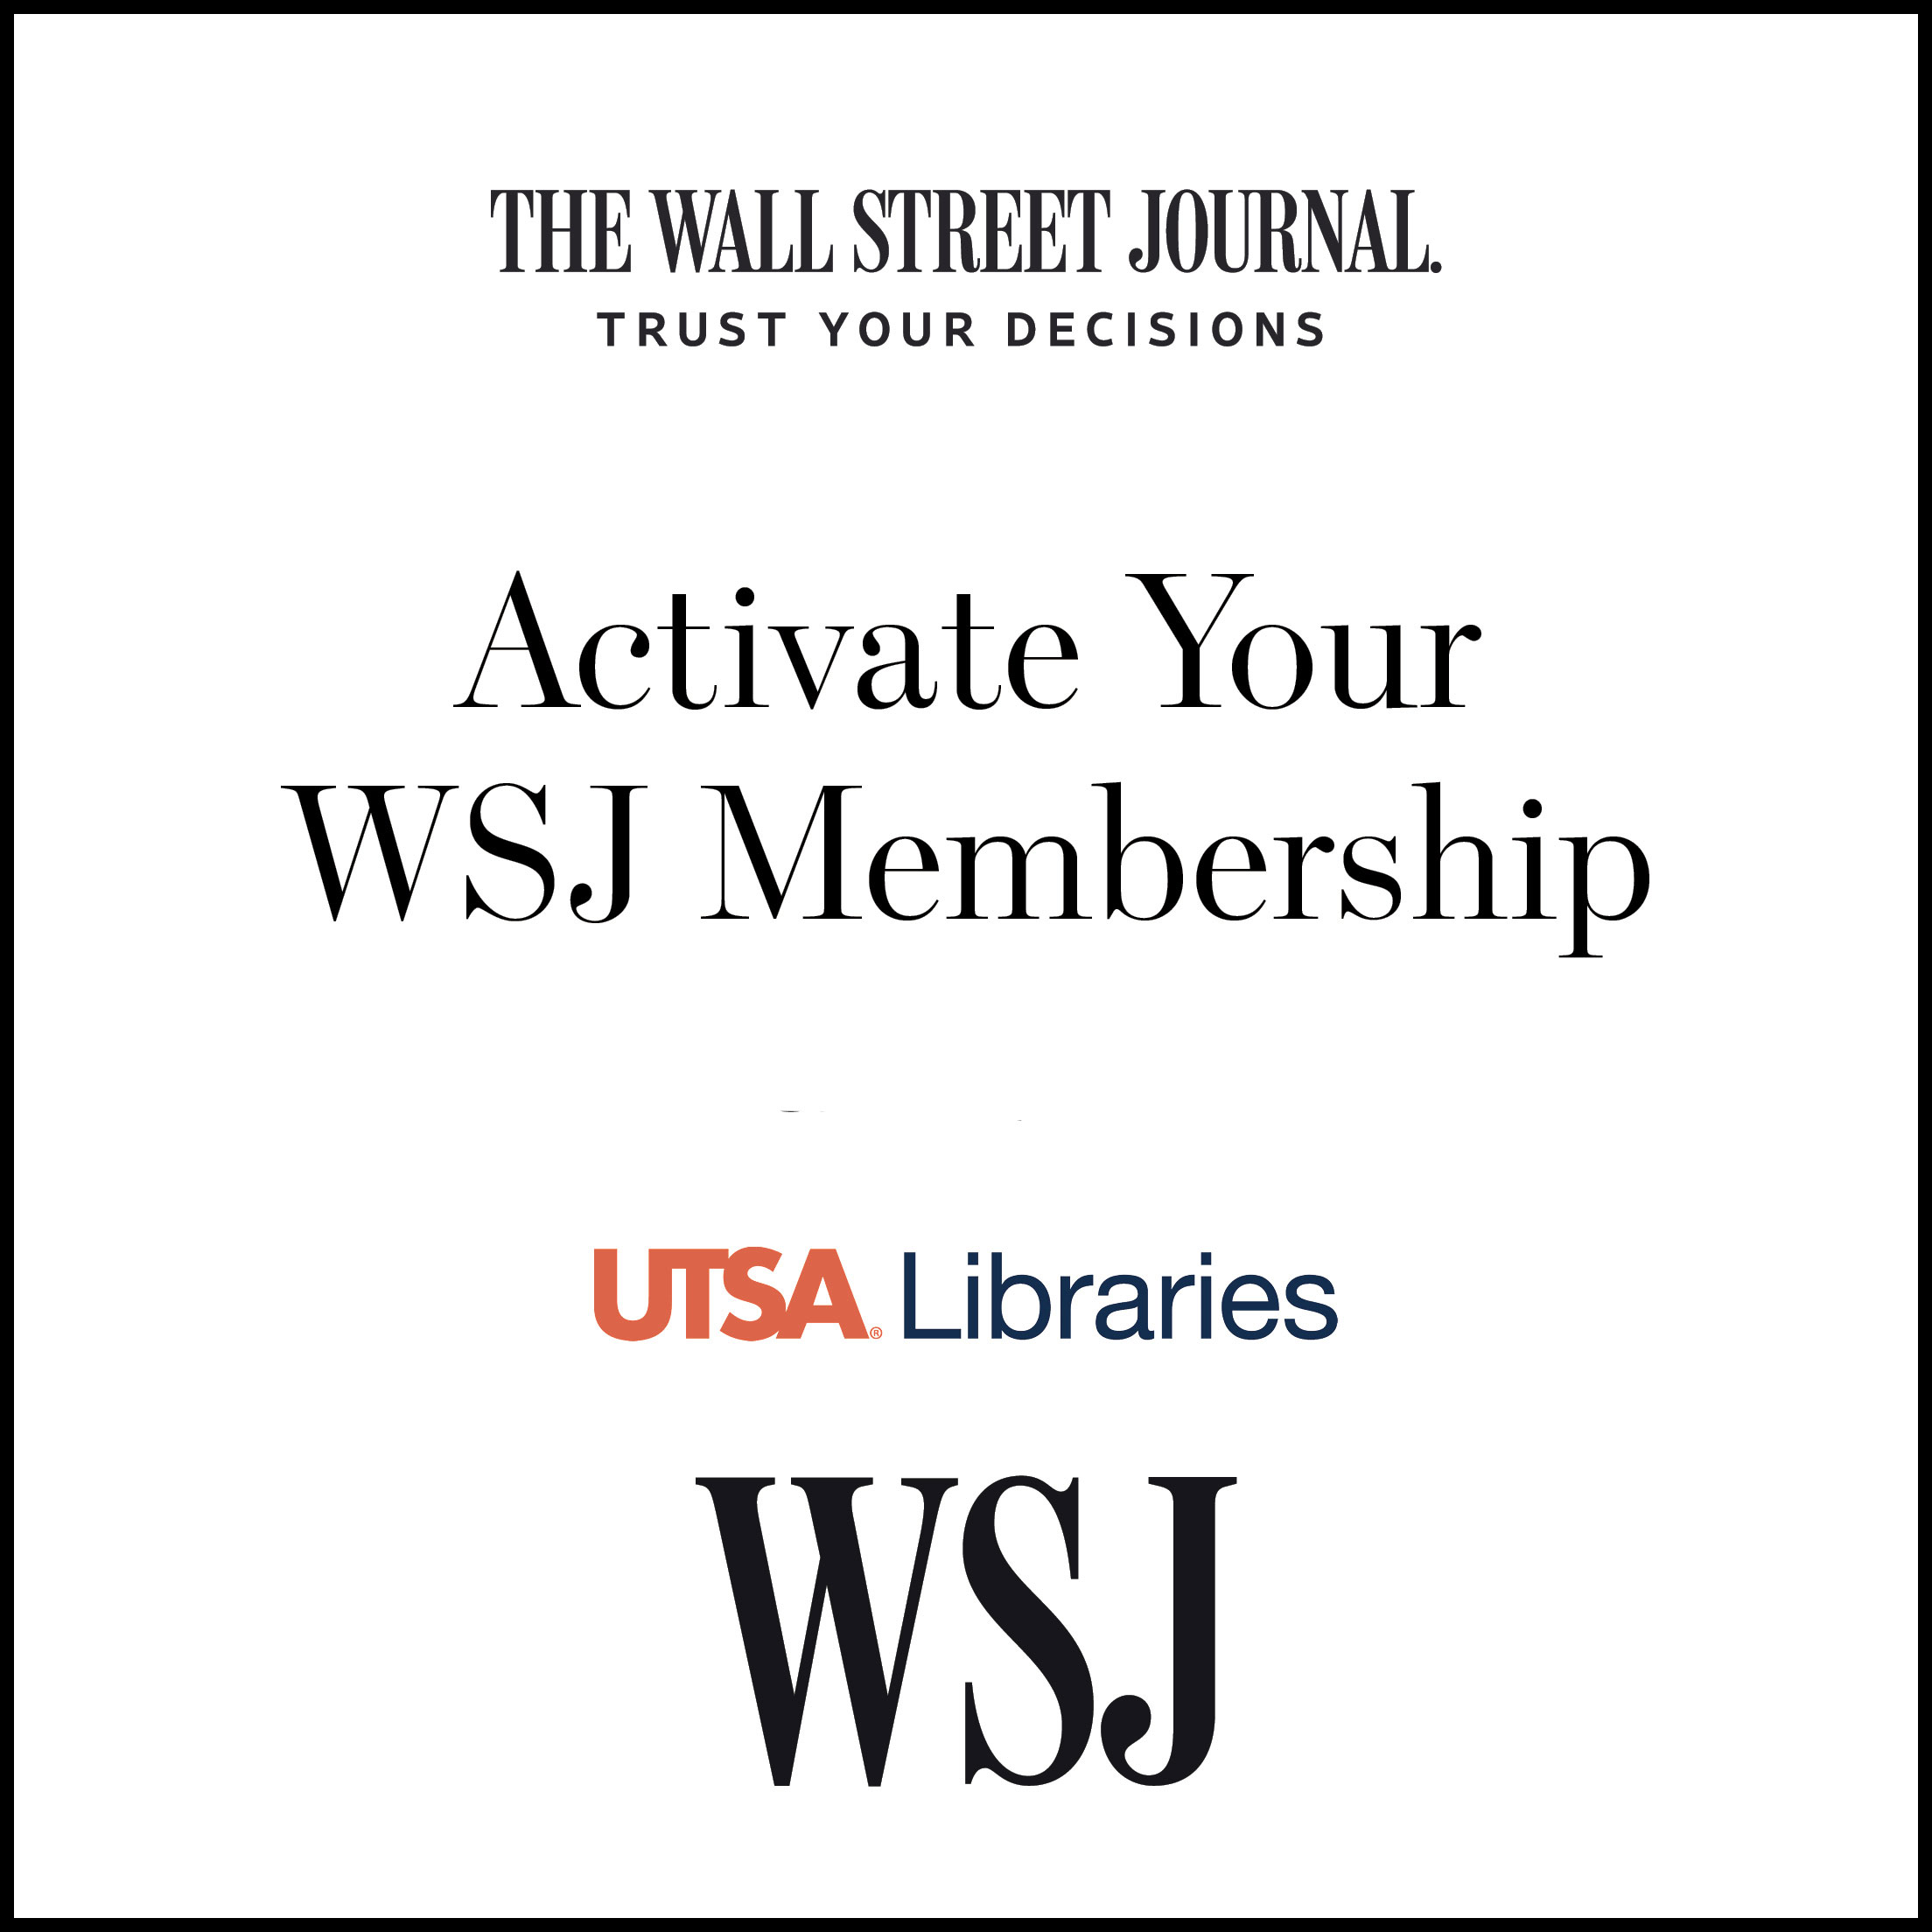 An informational image of UTSA Libraries partnering with The Wall Street Journal